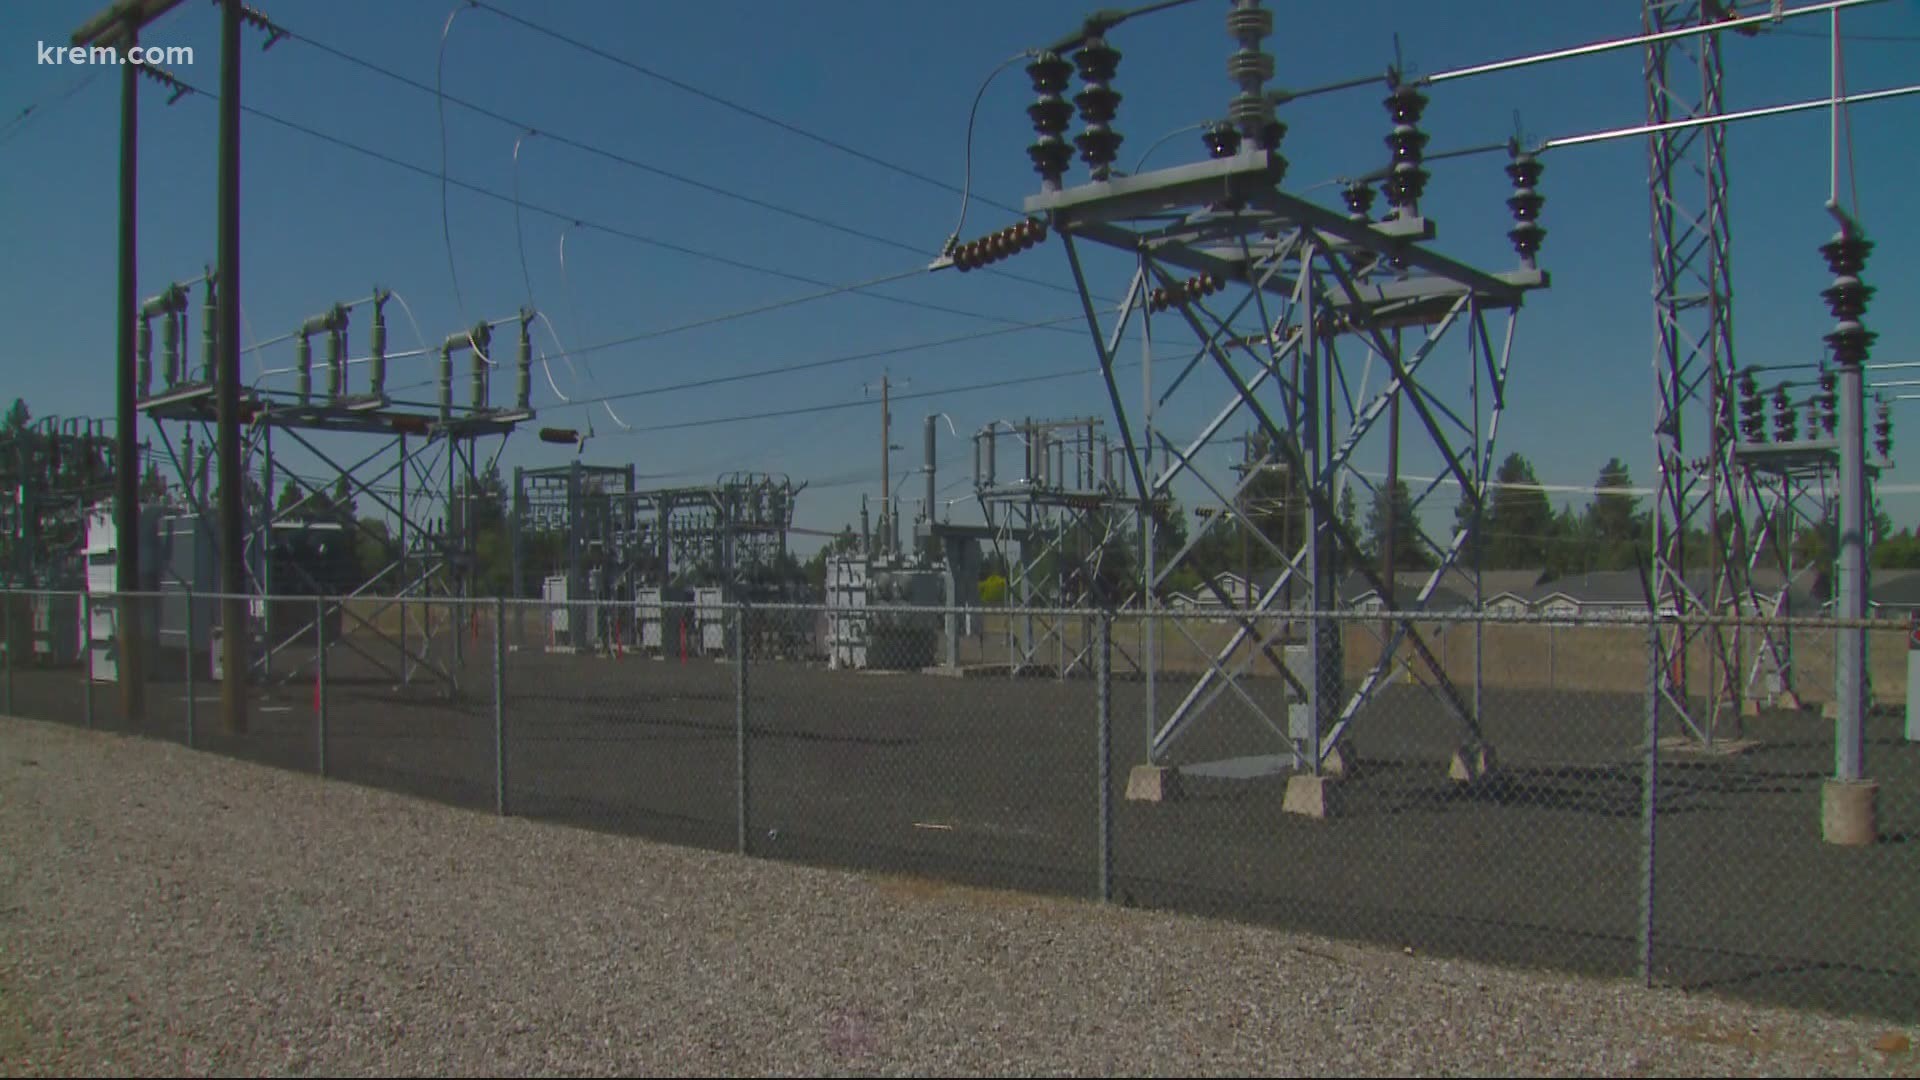 High heat has caused Avista to purposefully cause outages in some areas, but it's for different reasons than other recent high-profile blackouts.